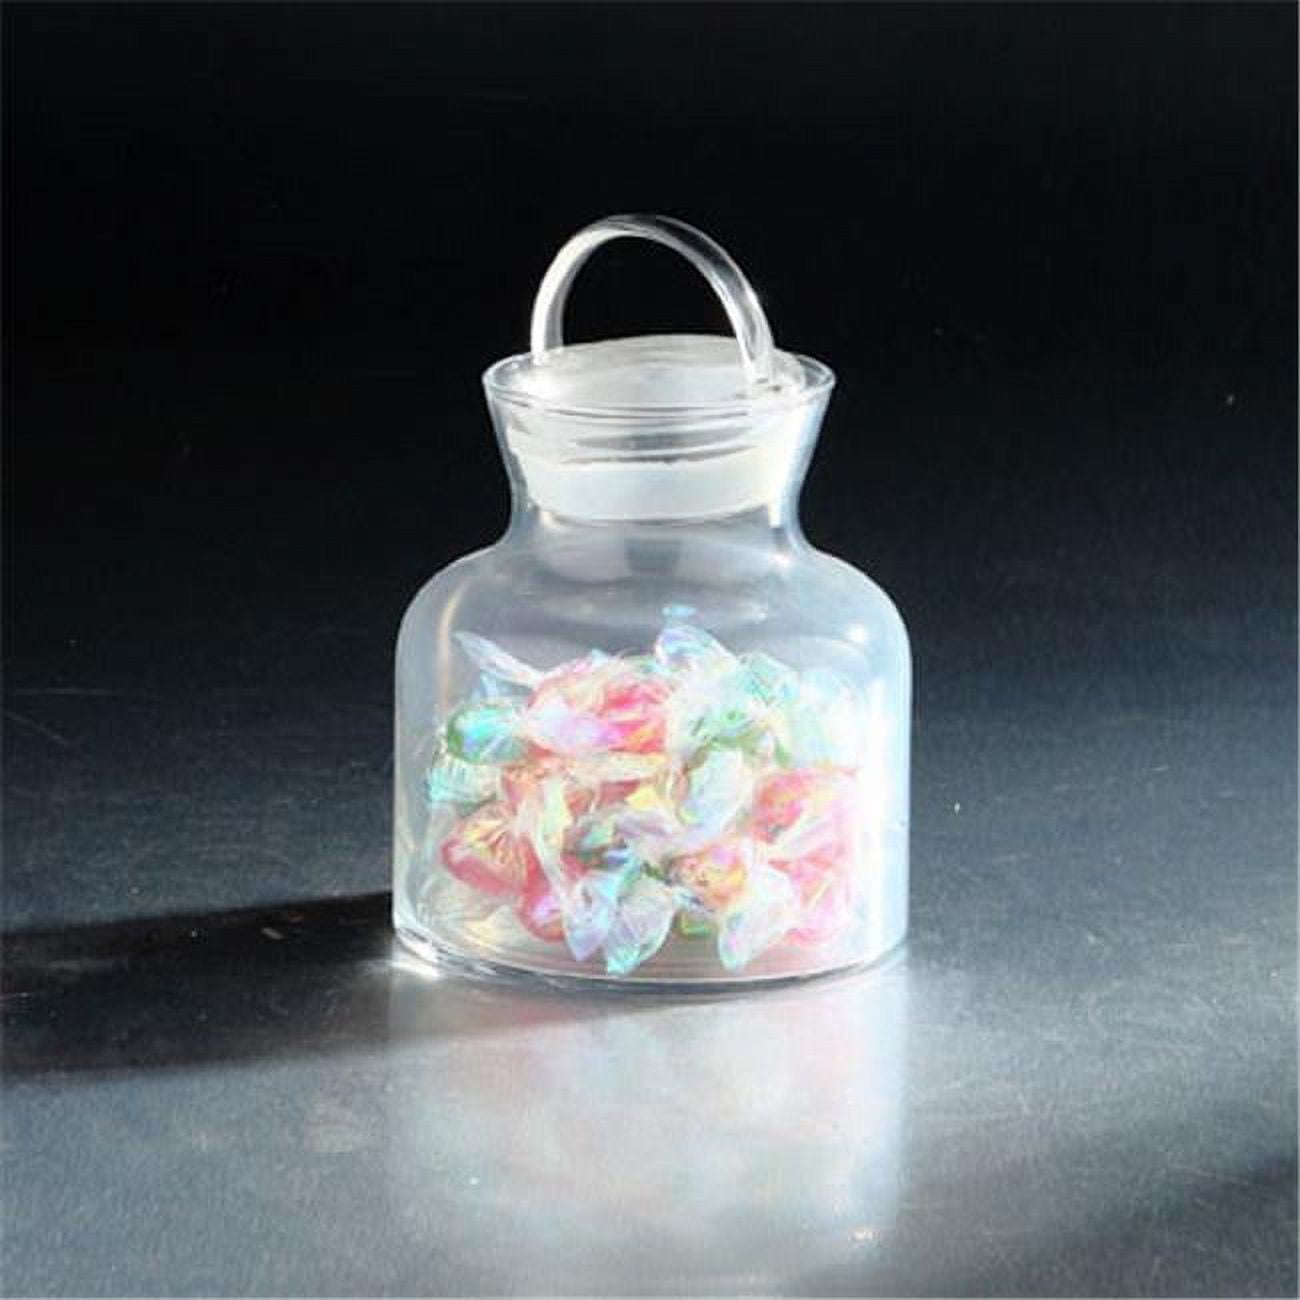 50011 7 X 4.5 In. Glass Jar With Lid, Clear